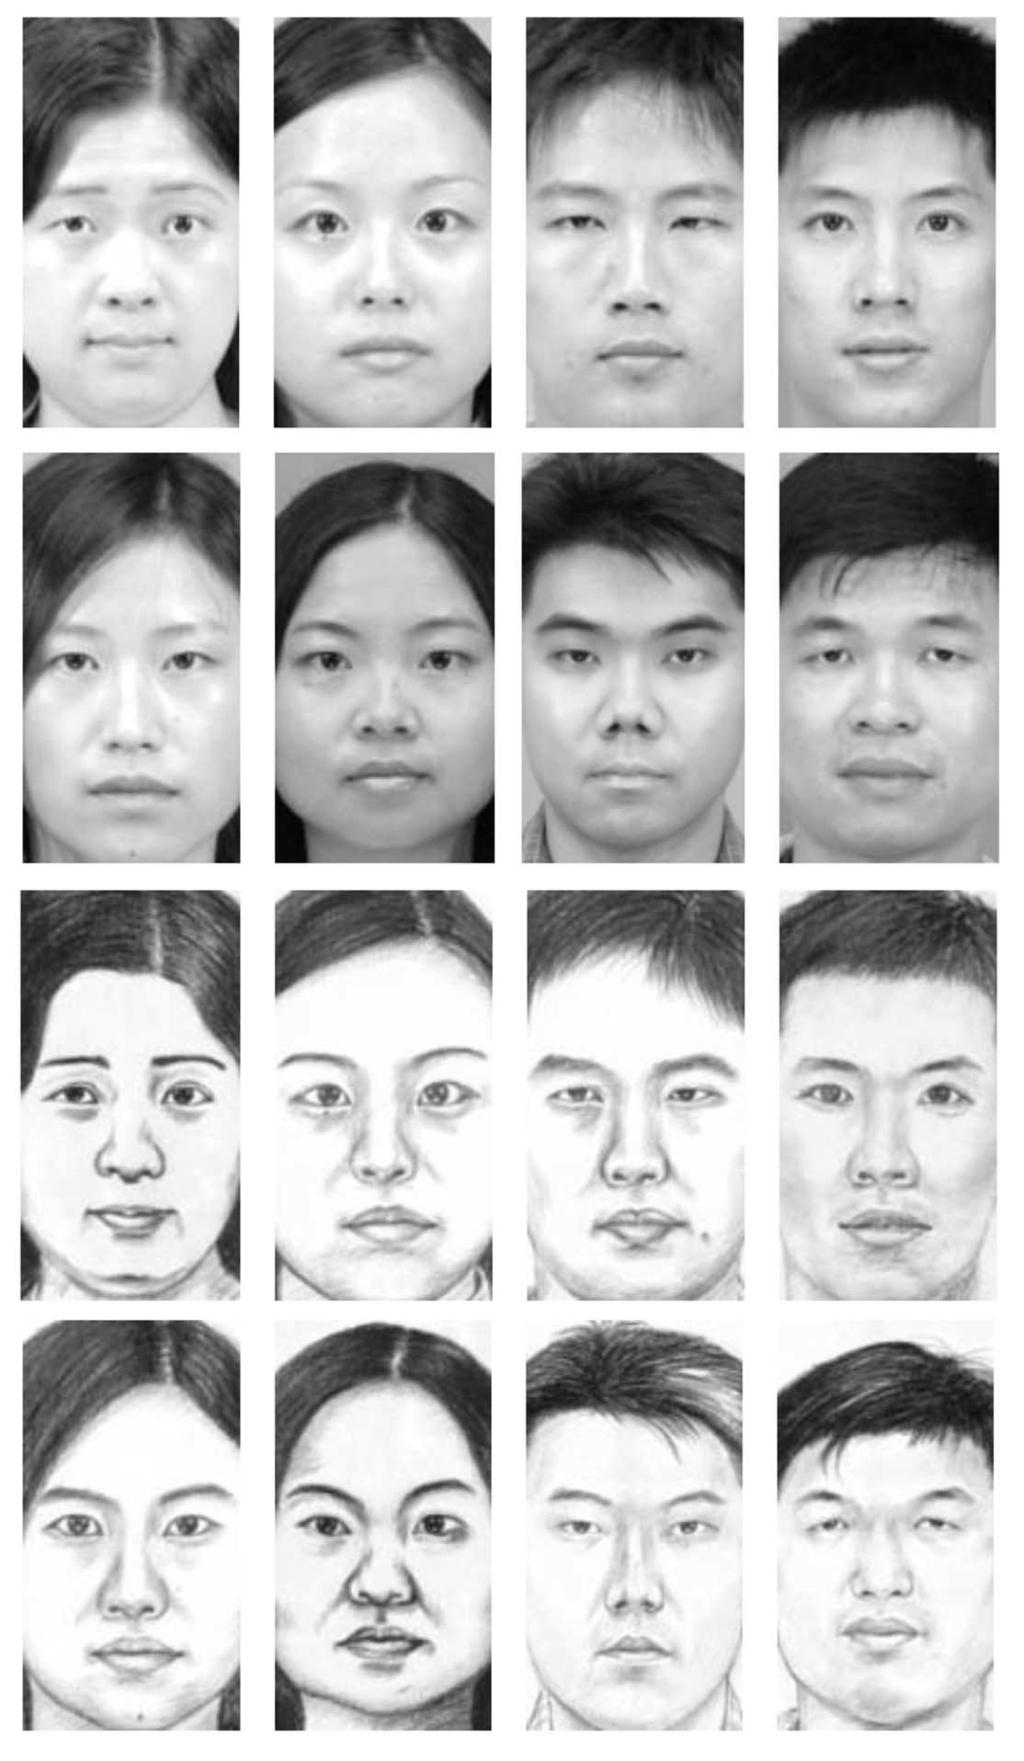 TANG AND WANG: FACE SKETCH RECOGNITION 51 Fig. 1. Sample face photos (top two rows) and sketches (bottom two rows).